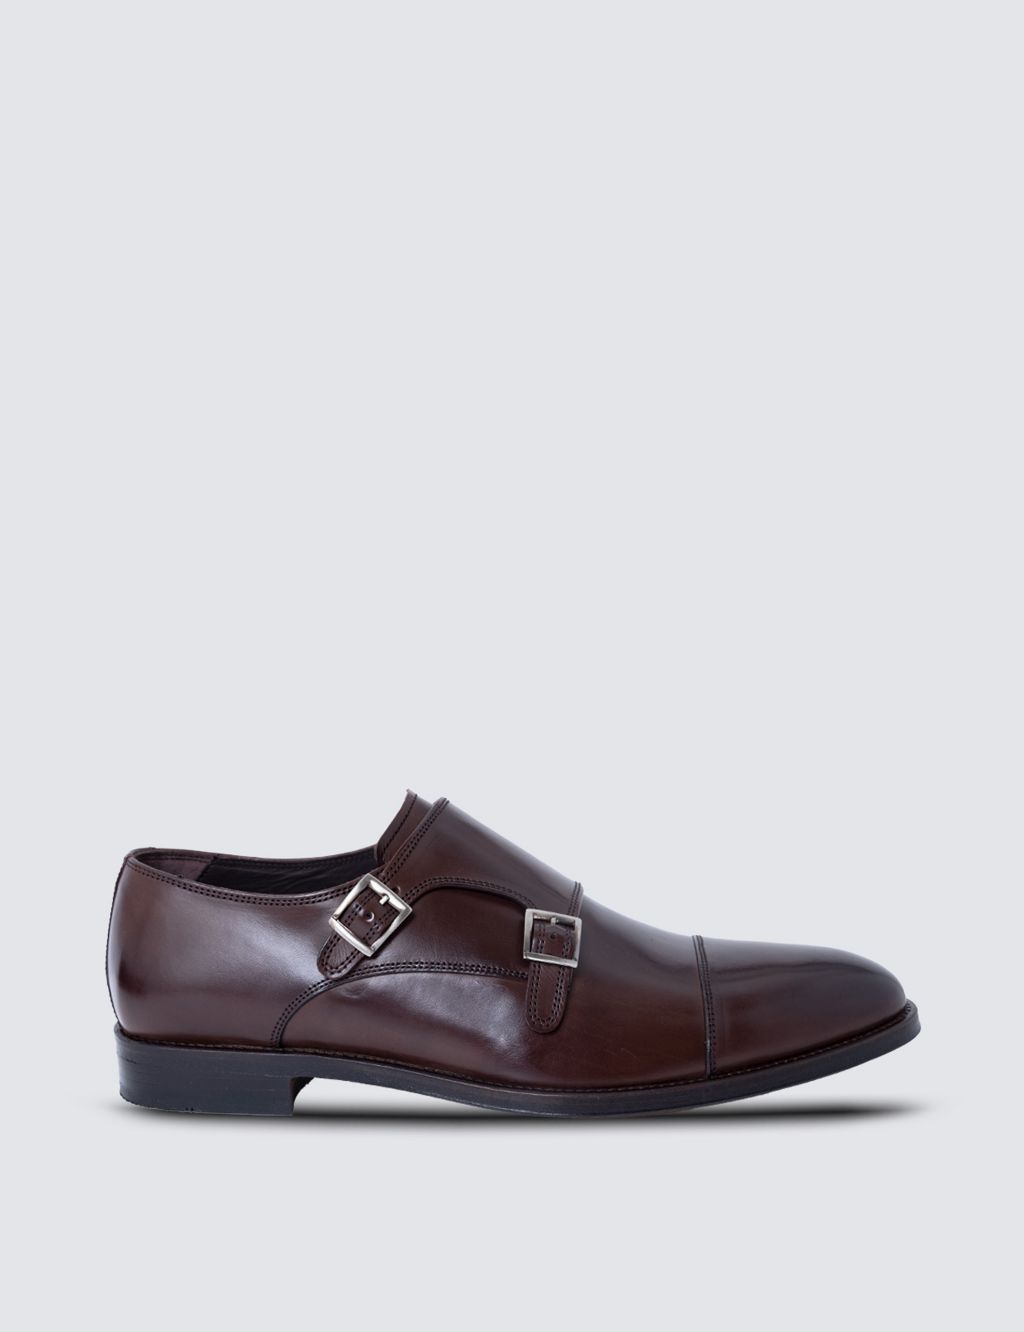 Wide Fit Leather Double Monk Strap Shoes image 1